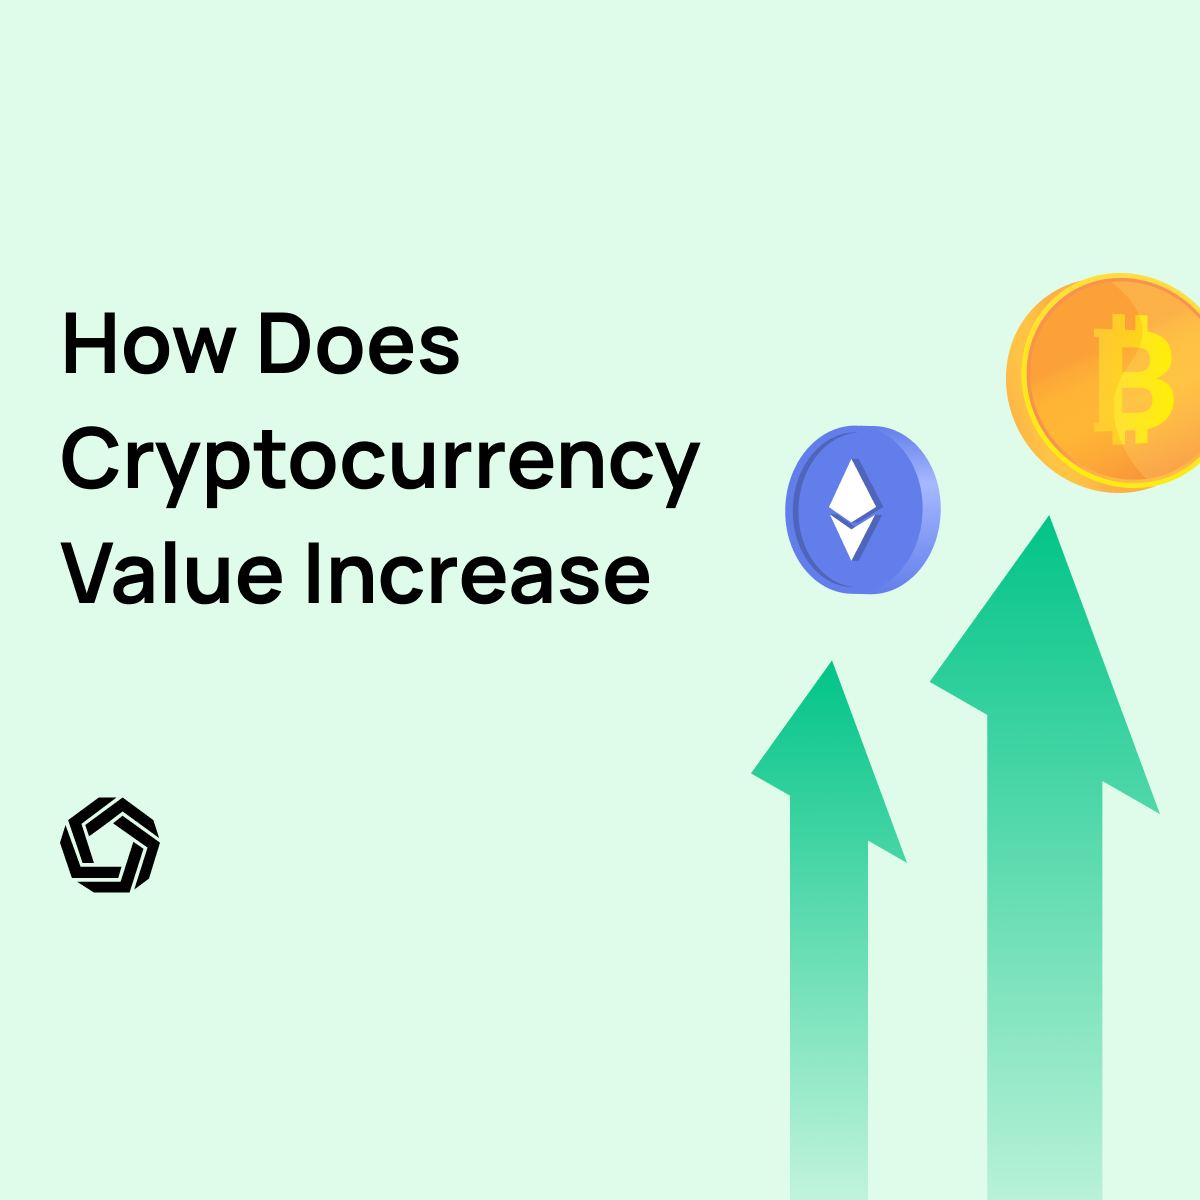 How Does Crypto Increase in Value